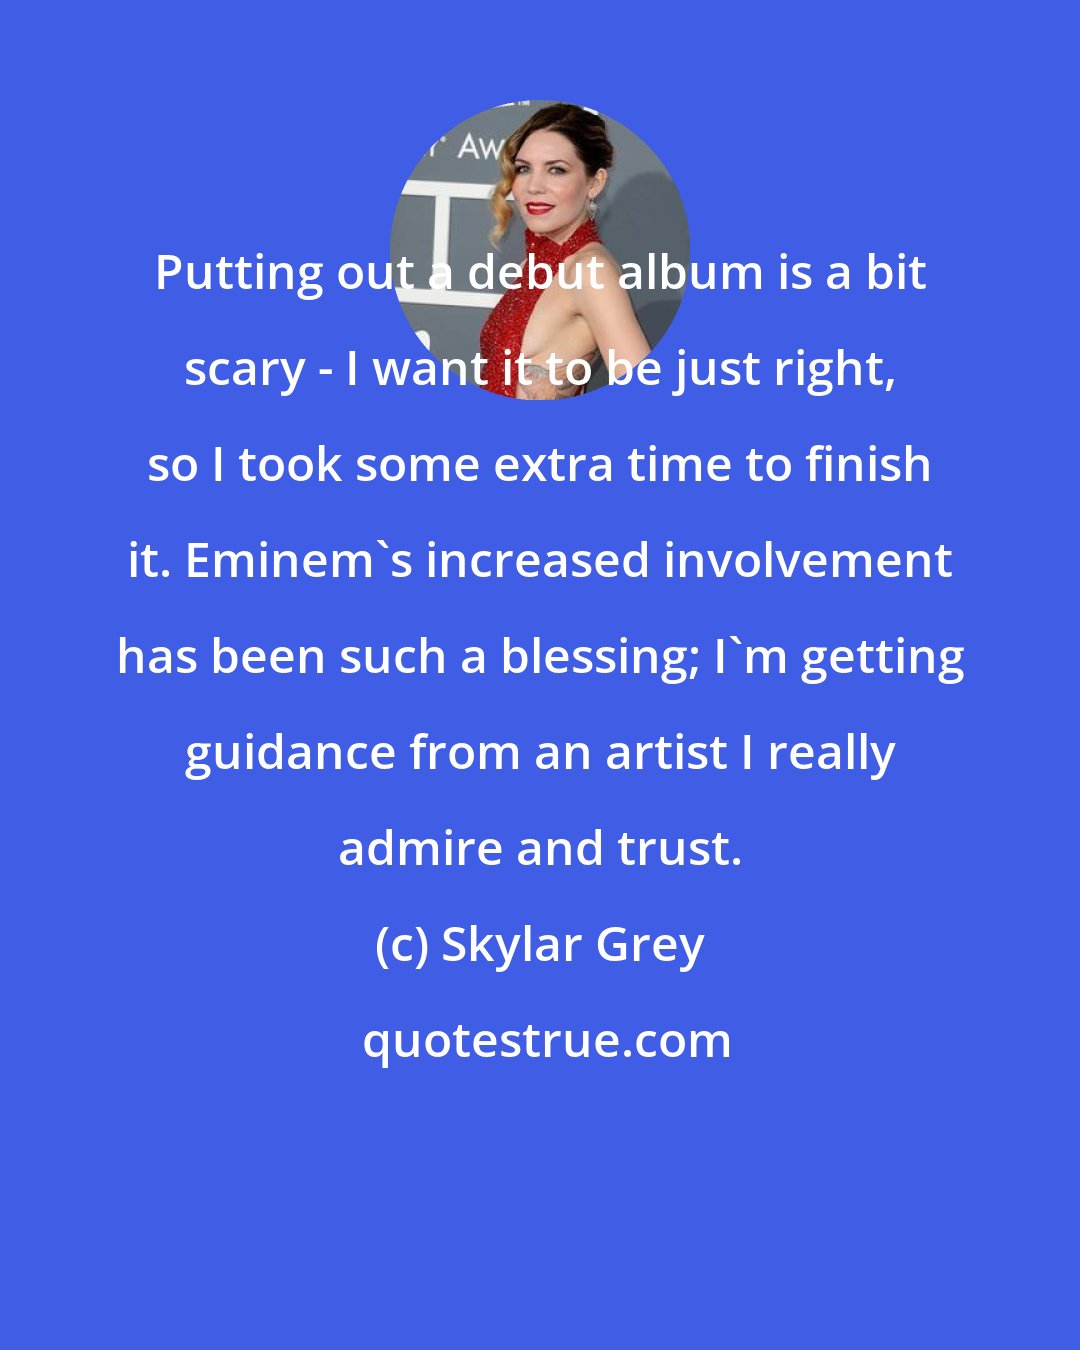 Skylar Grey: Putting out a debut album is a bit scary - I want it to be just right, so I took some extra time to finish it. Eminem's increased involvement has been such a blessing; I'm getting guidance from an artist I really admire and trust.